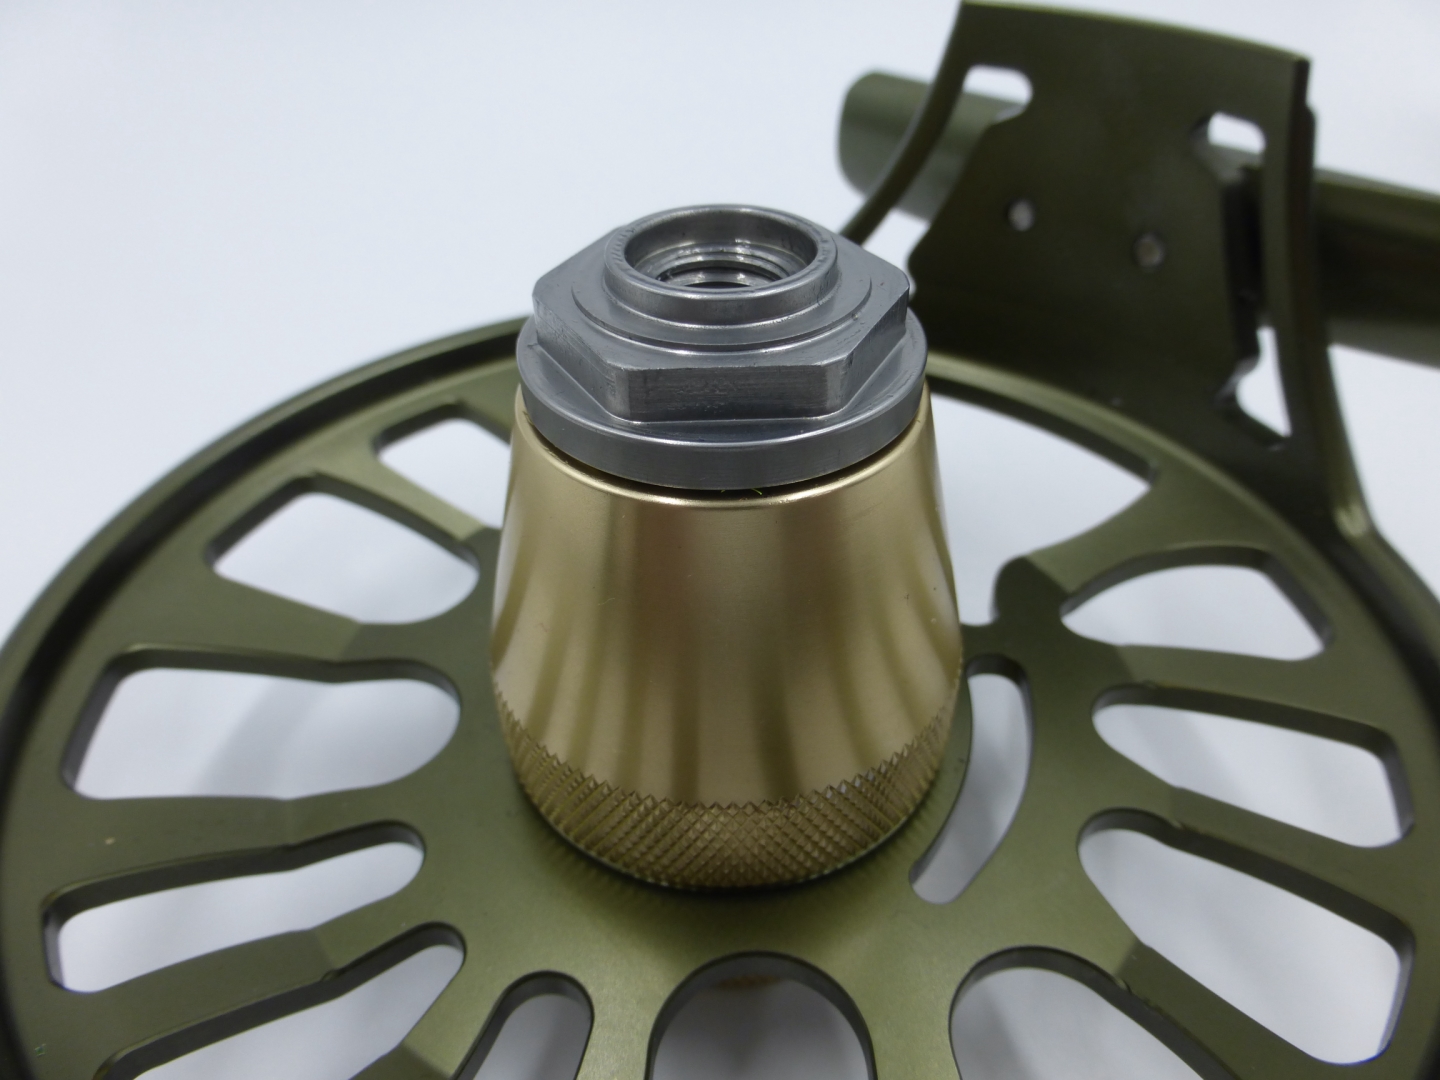 A&M 7 Serie # 7/8 Olive/Gold Fly Reel